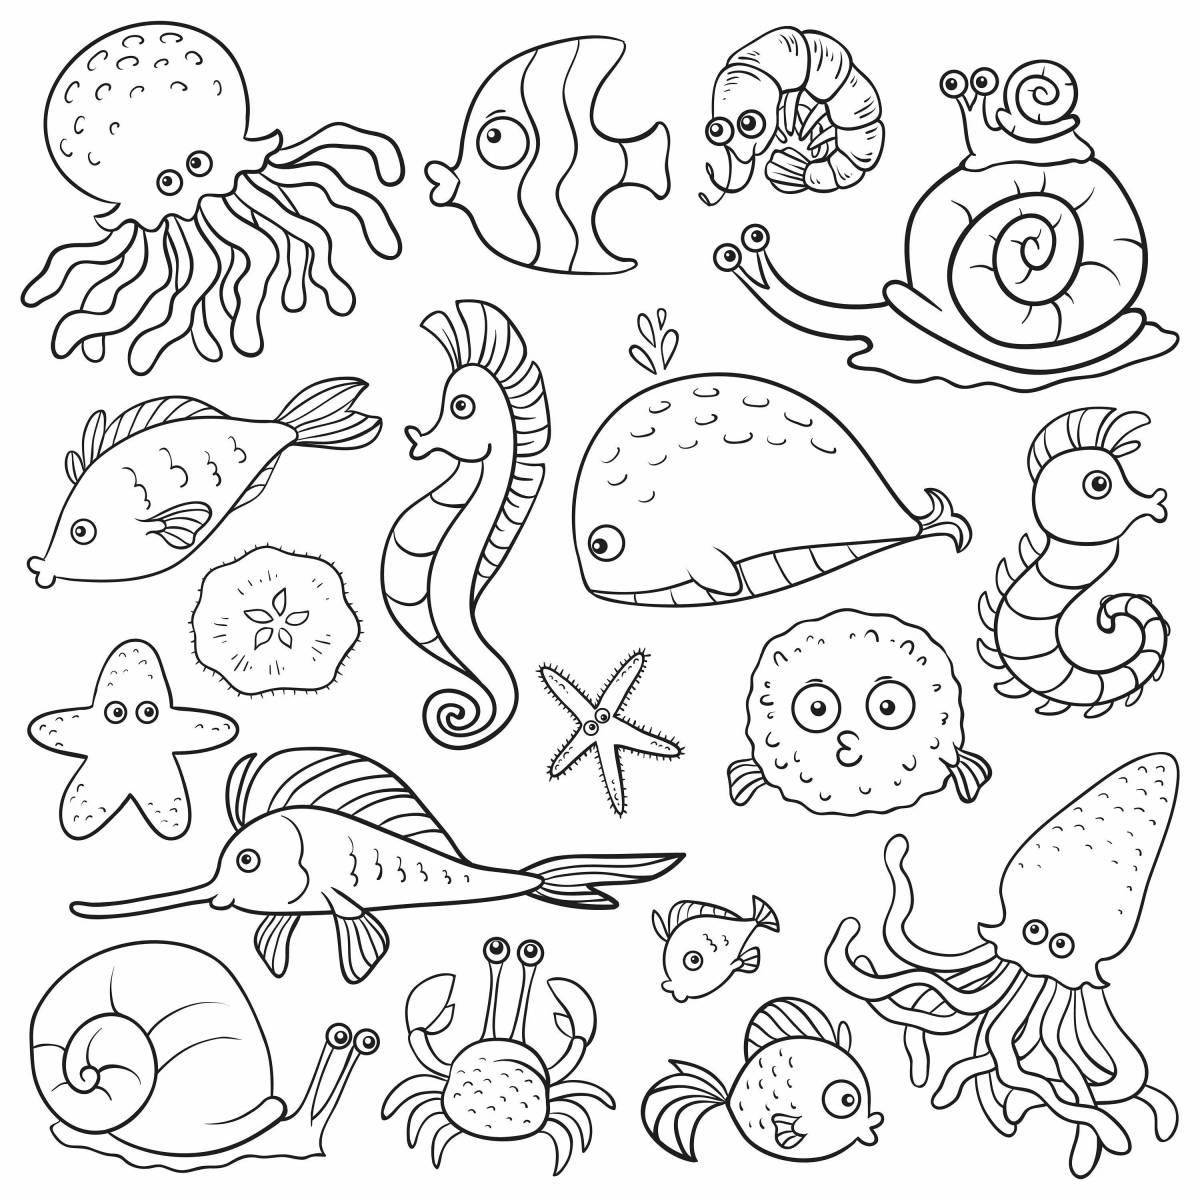 Glowing marine life coloring book for kids 5-6 years old